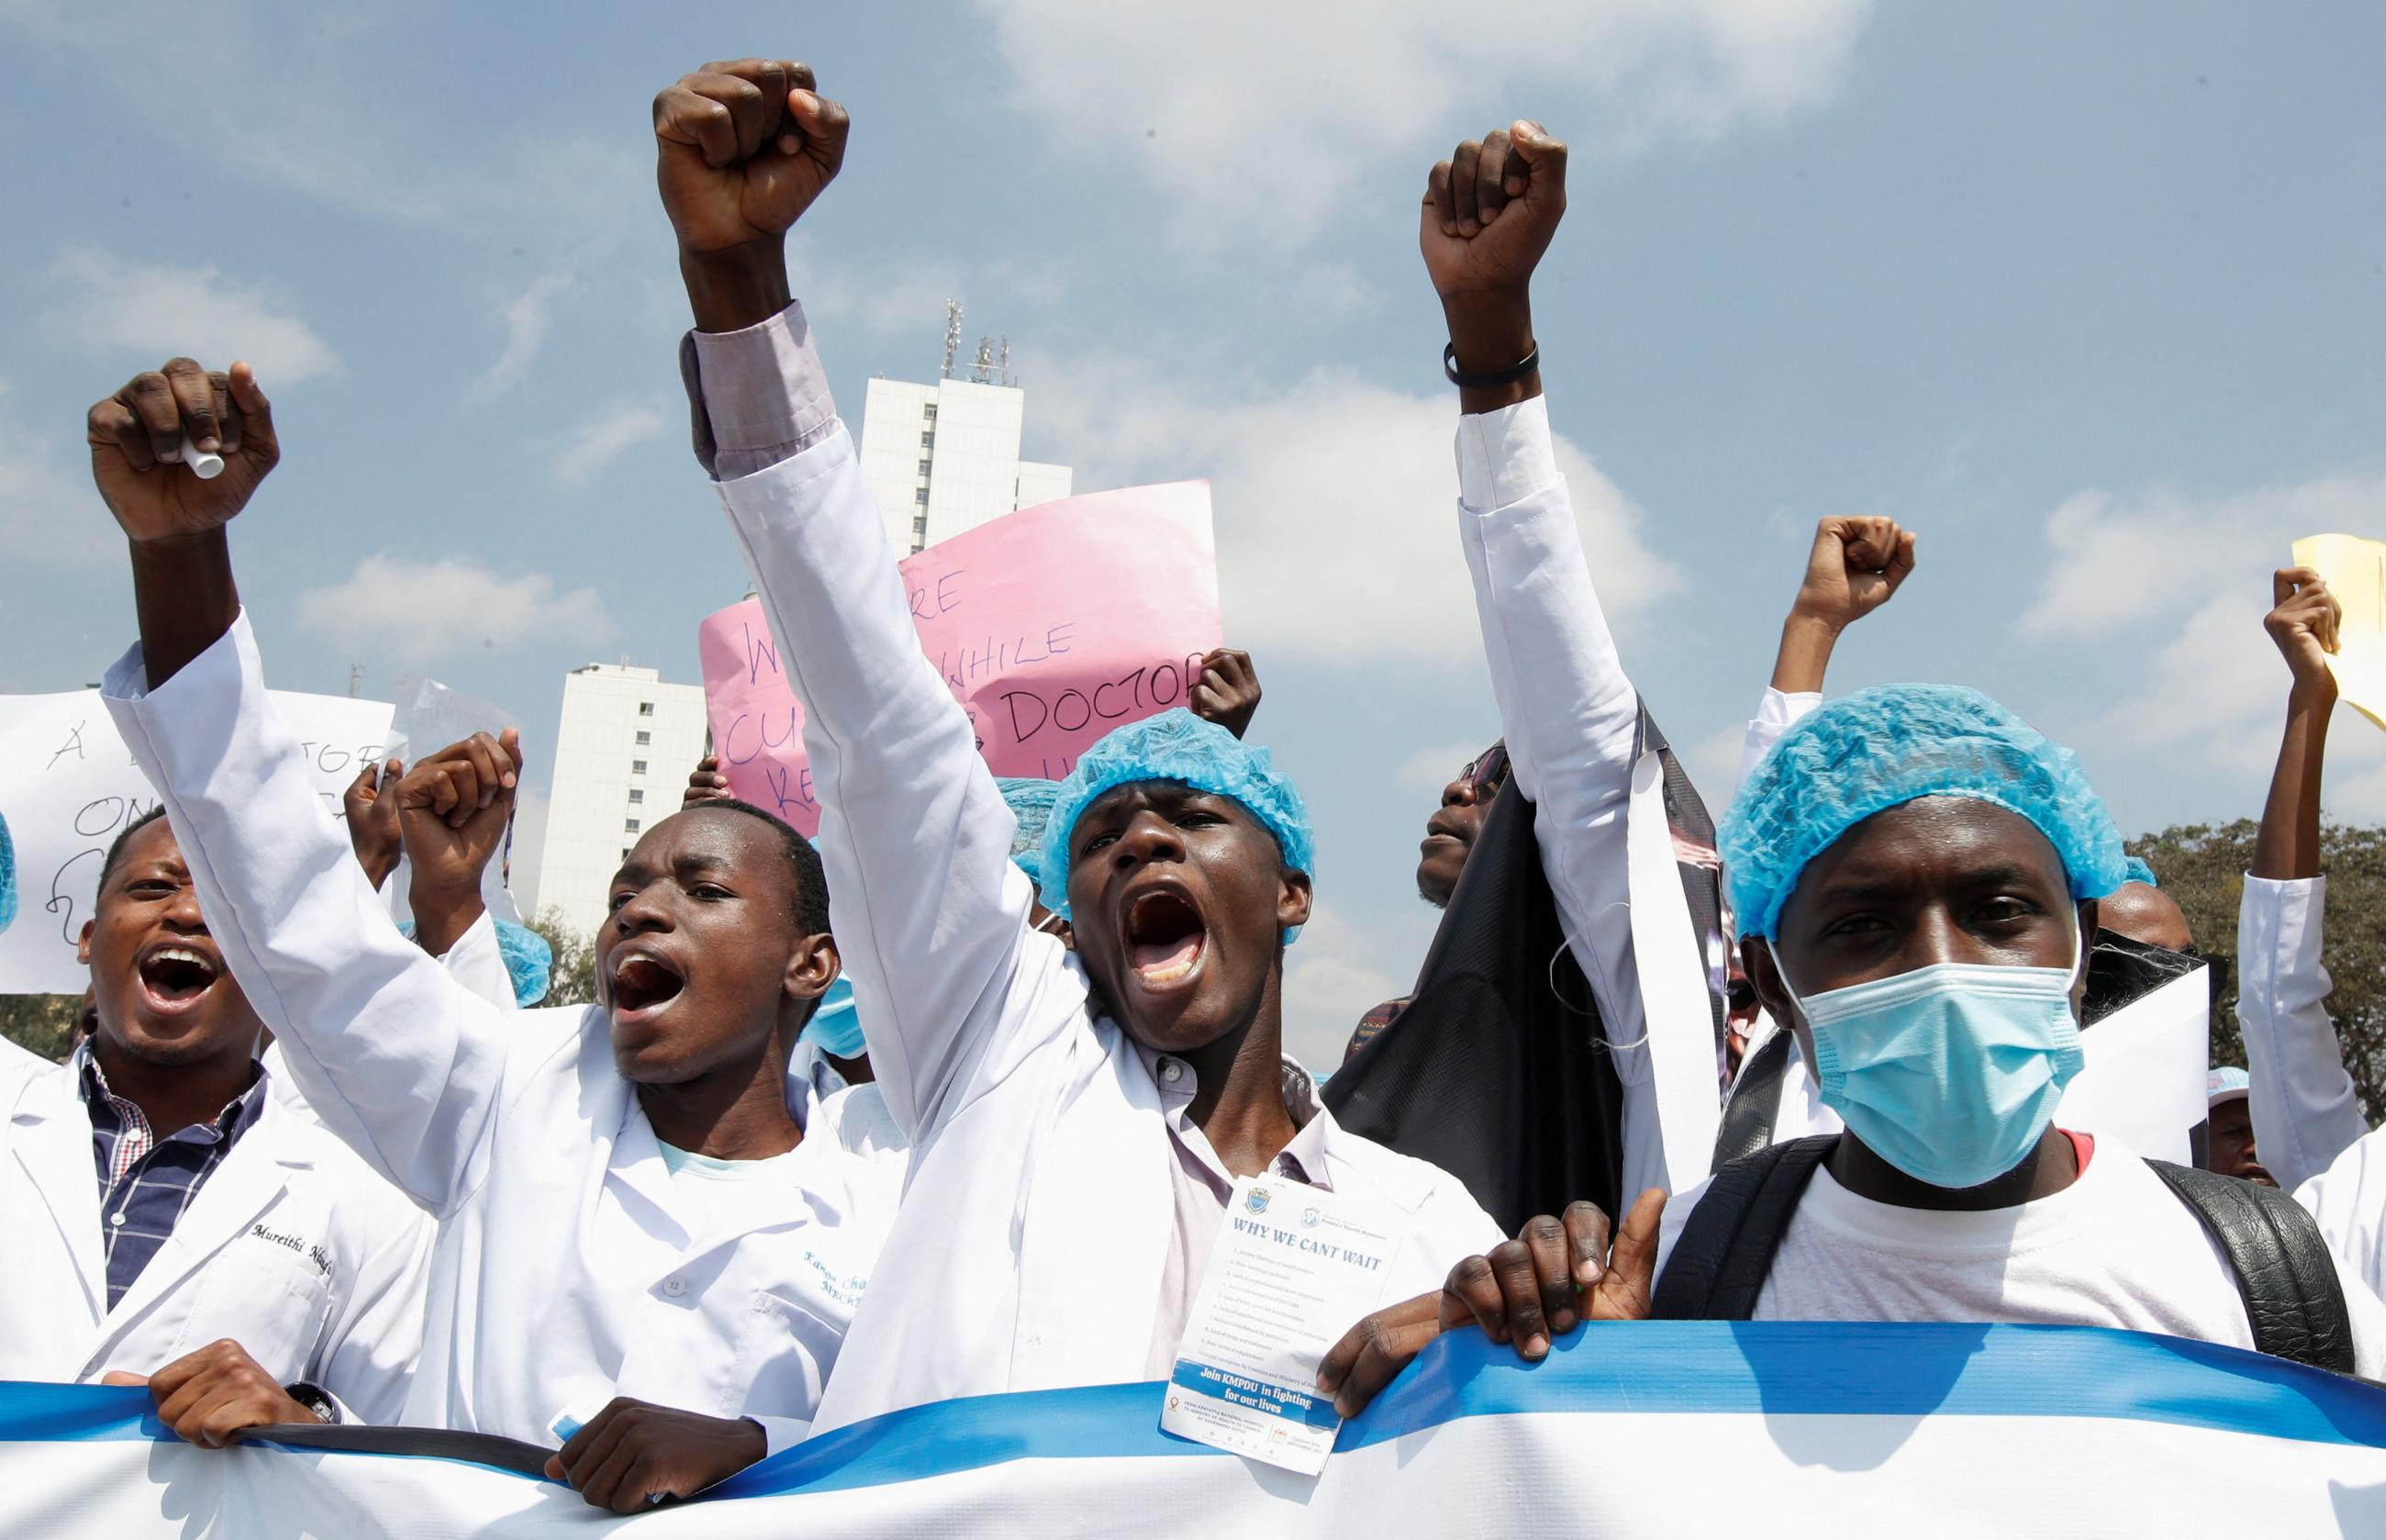 Doctors are seen raising their arms in protest.